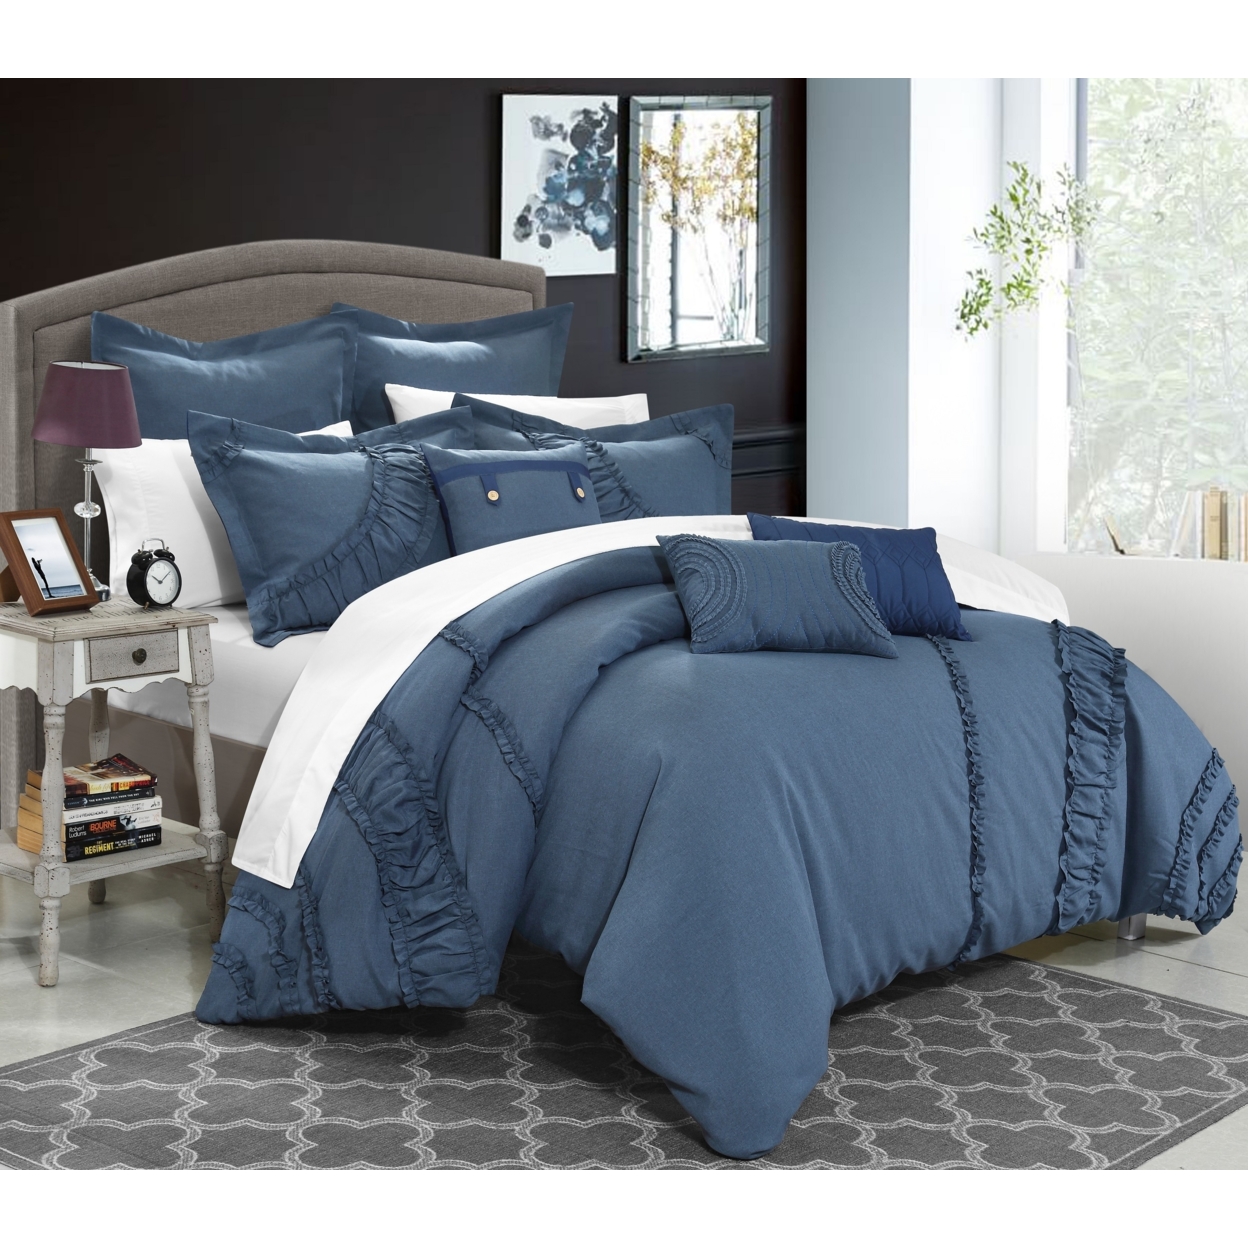 Chic Home 8 Piece Lucerne NEW FAUX LINEN FABRIC COLLECTION OVERSIZED AND OVERFILLED Embroidered Comforter Set - Blue, King